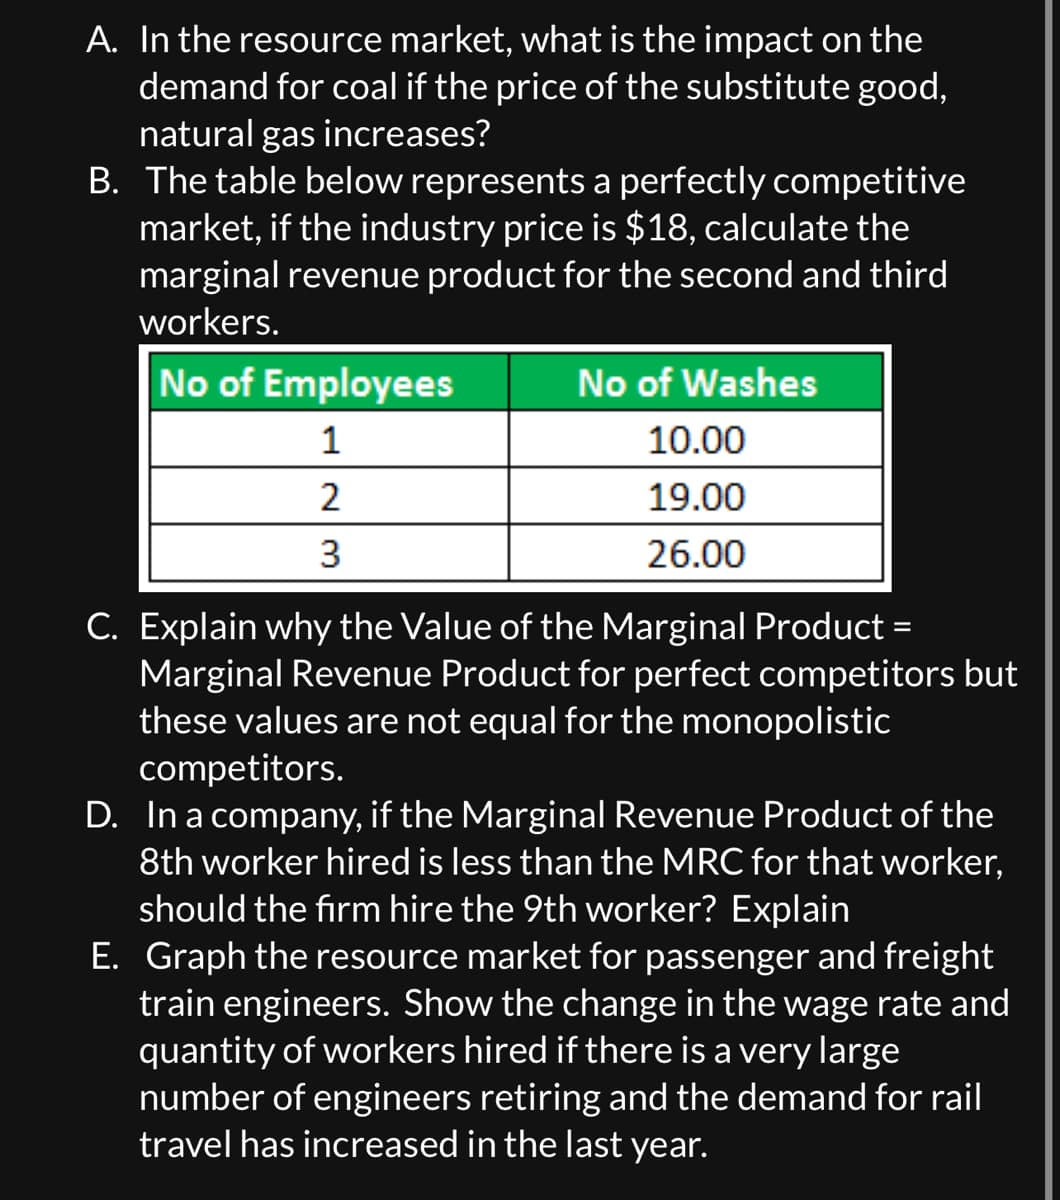 A. In the resource market, what is the impact on the
demand for coal if the price of the substitute good,
natural gas increases?
B. The table below represents a perfectly competitive
market, if the industry price is $18, calculate the
marginal revenue product for the second and third
workers.
No of Employees
1
2
3
No of Washes
10.00
19.00
26.00
C. Explain why the Value of the Marginal Product
Marginal Revenue Product for perfect competitors but
these values are not equal for the monopolistic
competitors.
D. In a company, if the Marginal Revenue Product of the
8th worker hired is less than the MRC for that worker,
should the firm hire the 9th worker? Explain
E. Graph the resource market for passenger and freight
train engineers. Show the change in the wage rate and
quantity of workers hired if there is a very large
number of engineers retiring and the demand for rail
travel has increased in the last year.
=